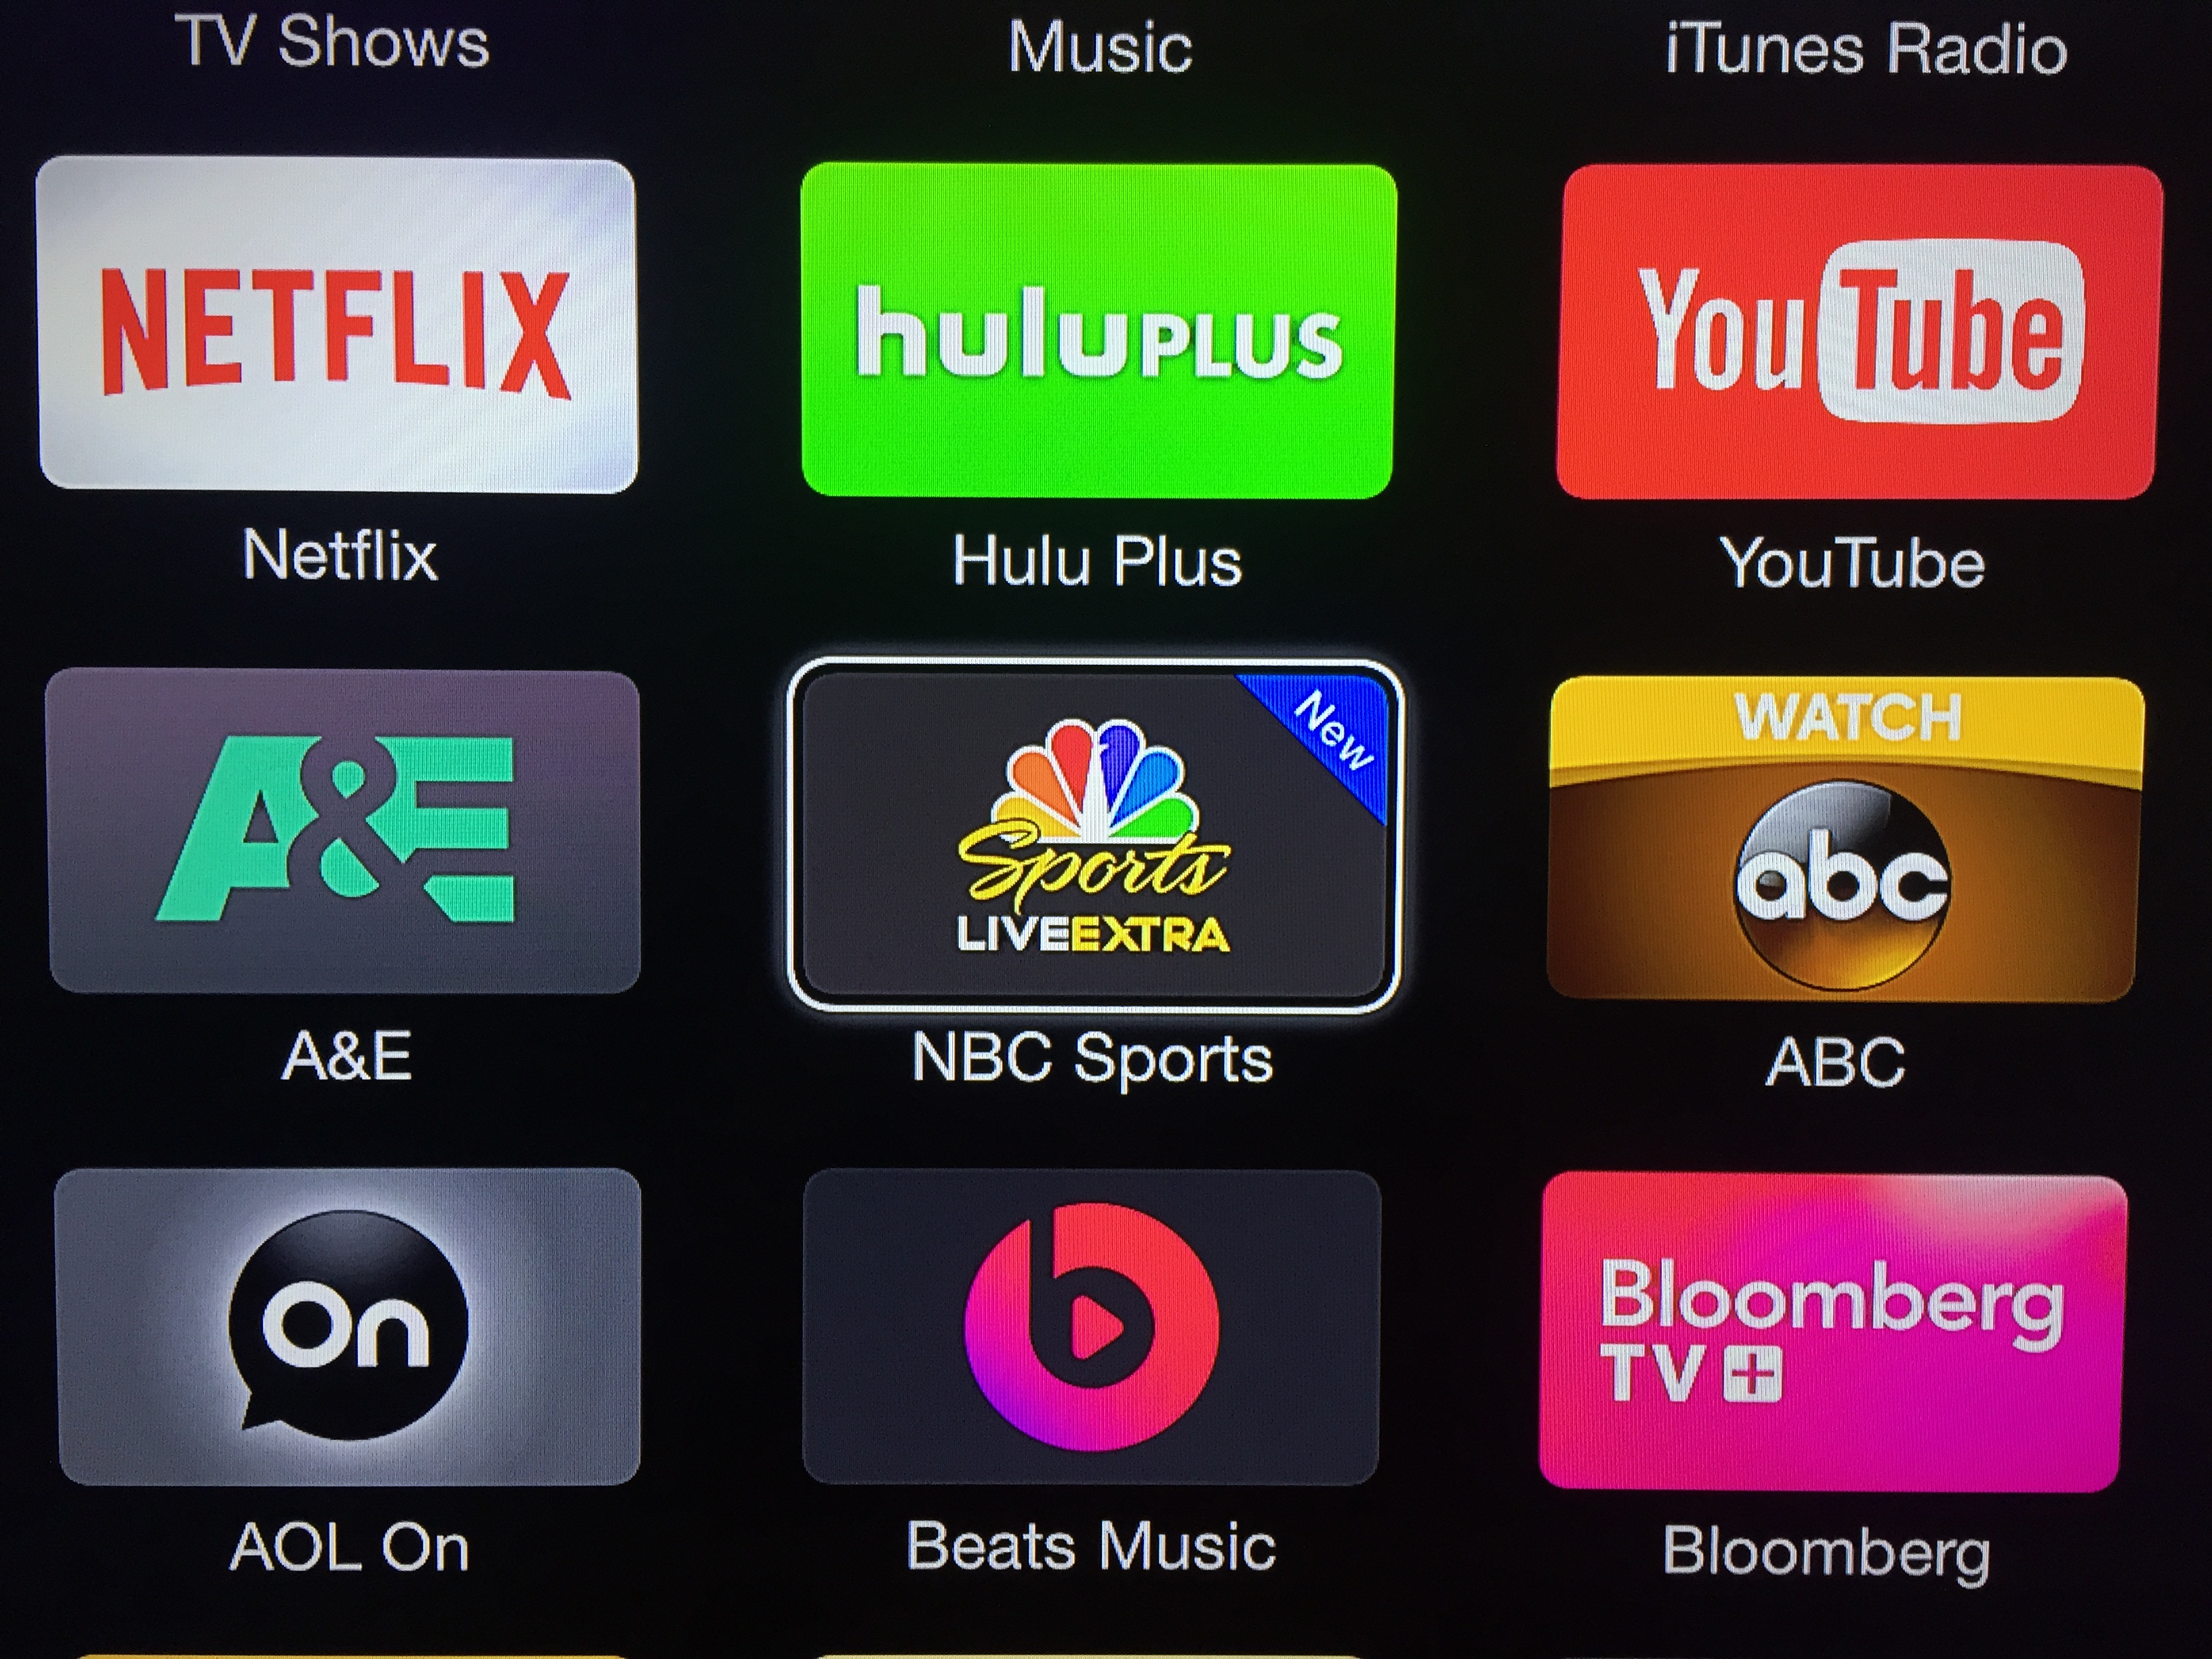 Apple TV adds NBC Sports channel with live event streaming